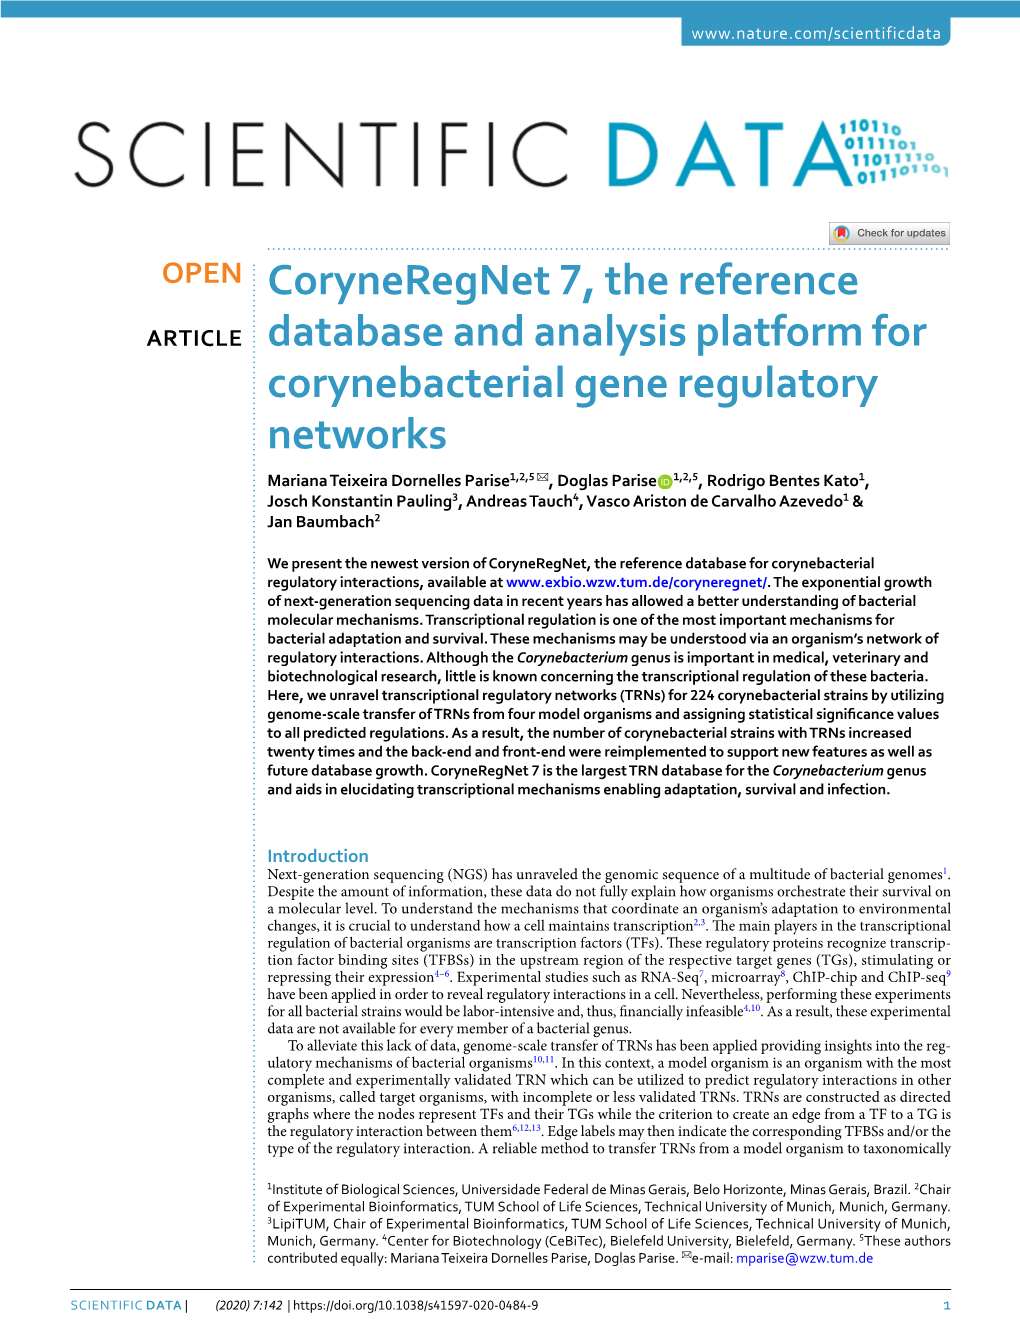 Coryneregnet 7, the Reference Database and Analysis Platform For